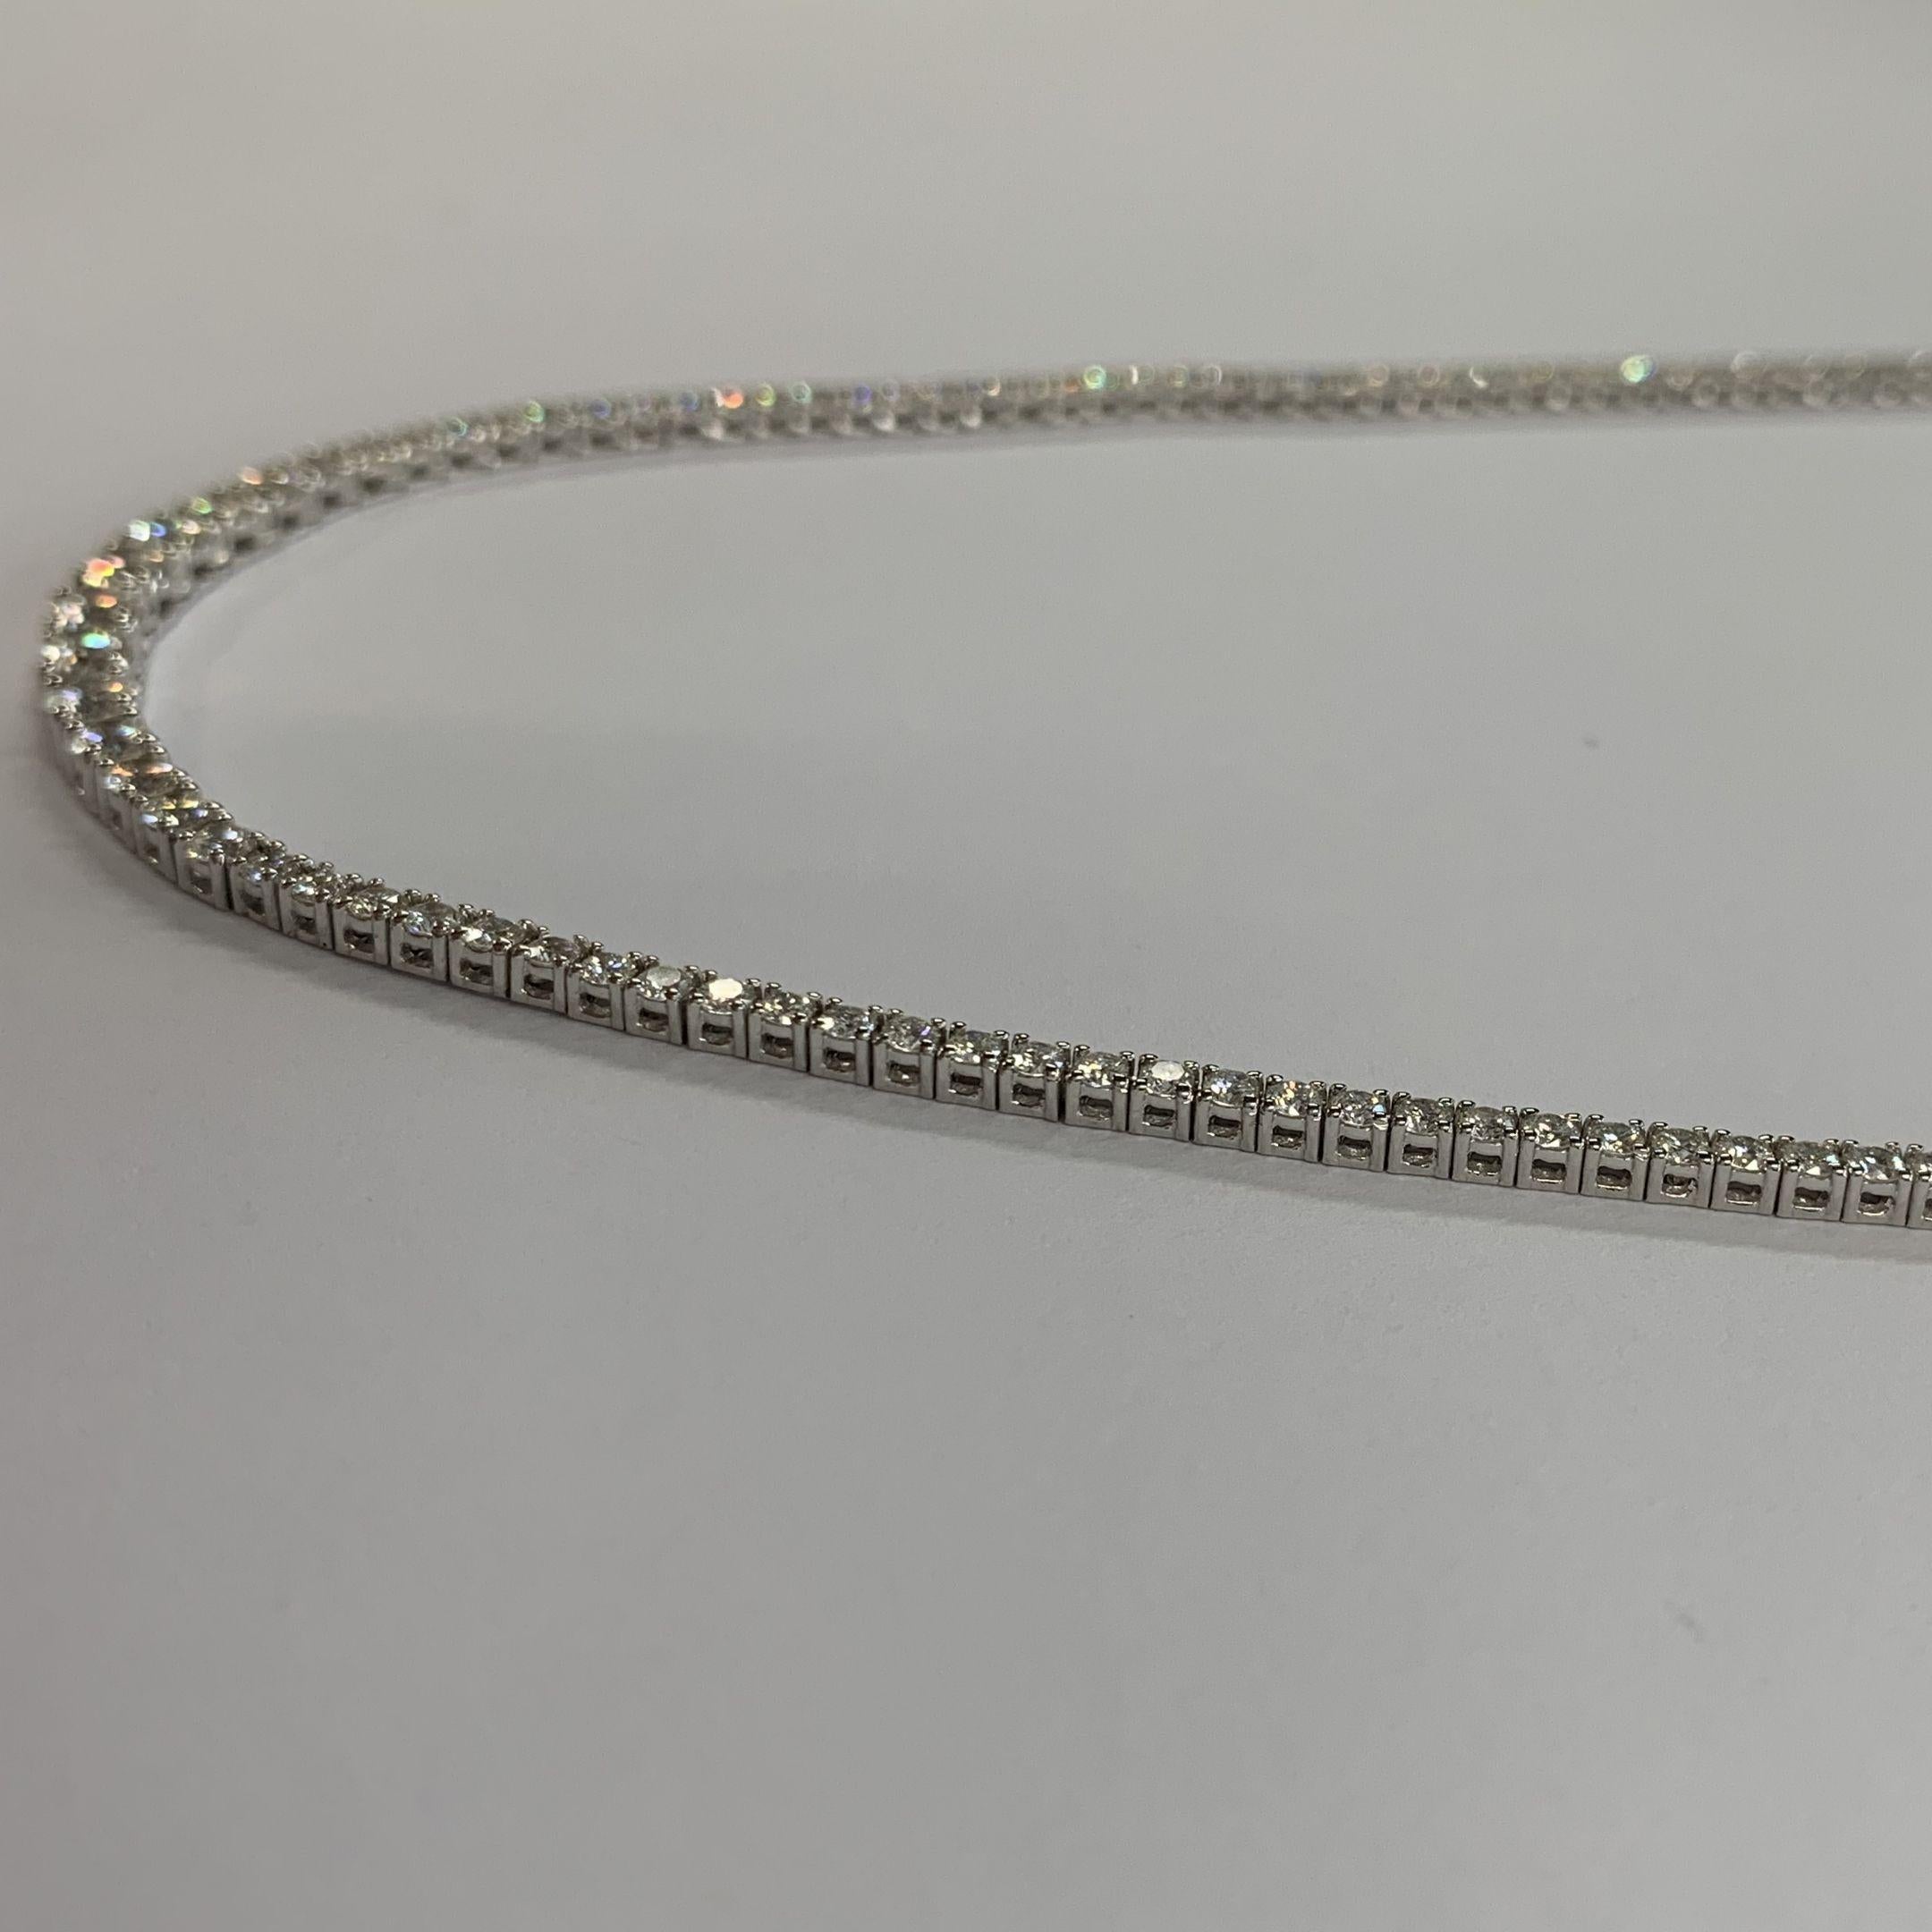 Diamond Riviera Necklace made with real/natural brilliant cut diamonds. Total Diamond Weight: 3.14 carats. Diamond Quantity: 71 round diamonds. Color: G. Clarity: SI1. Mounted on 18kt white gold with security closure.